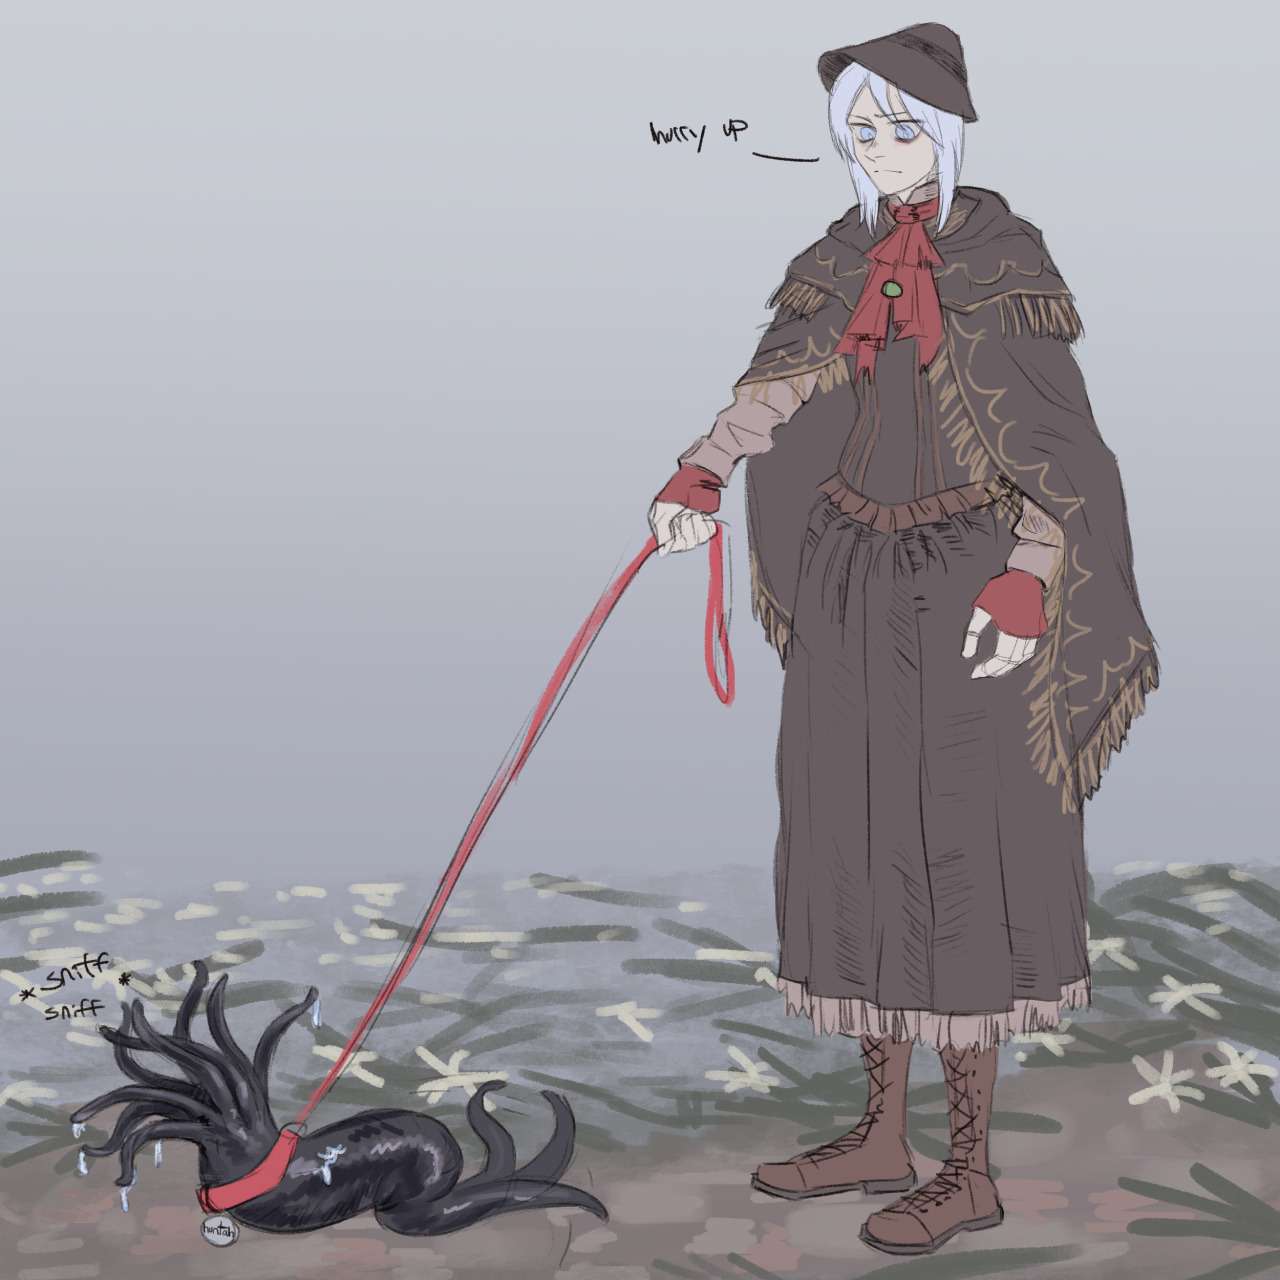 woman holding a little tentacle worm on a leash. idk i think its bloodborne or something.